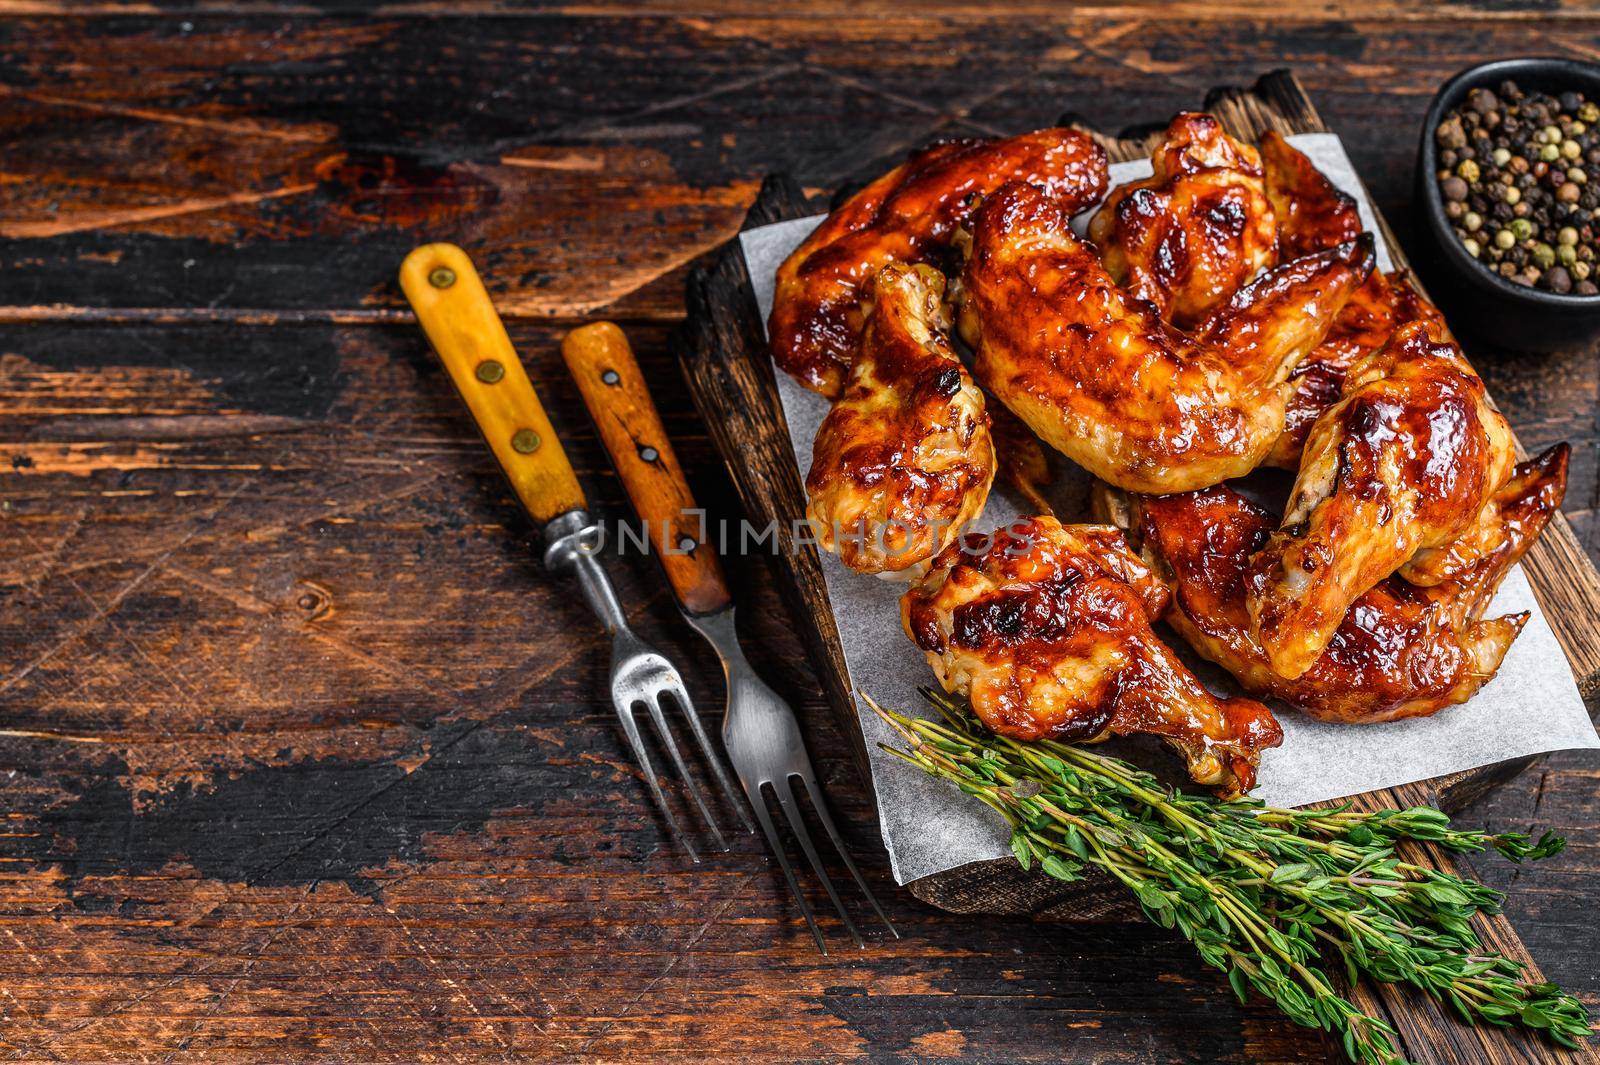 Baked Bbq chicken wings with dip sauce. Dark wooden background. Top view. Copy space.